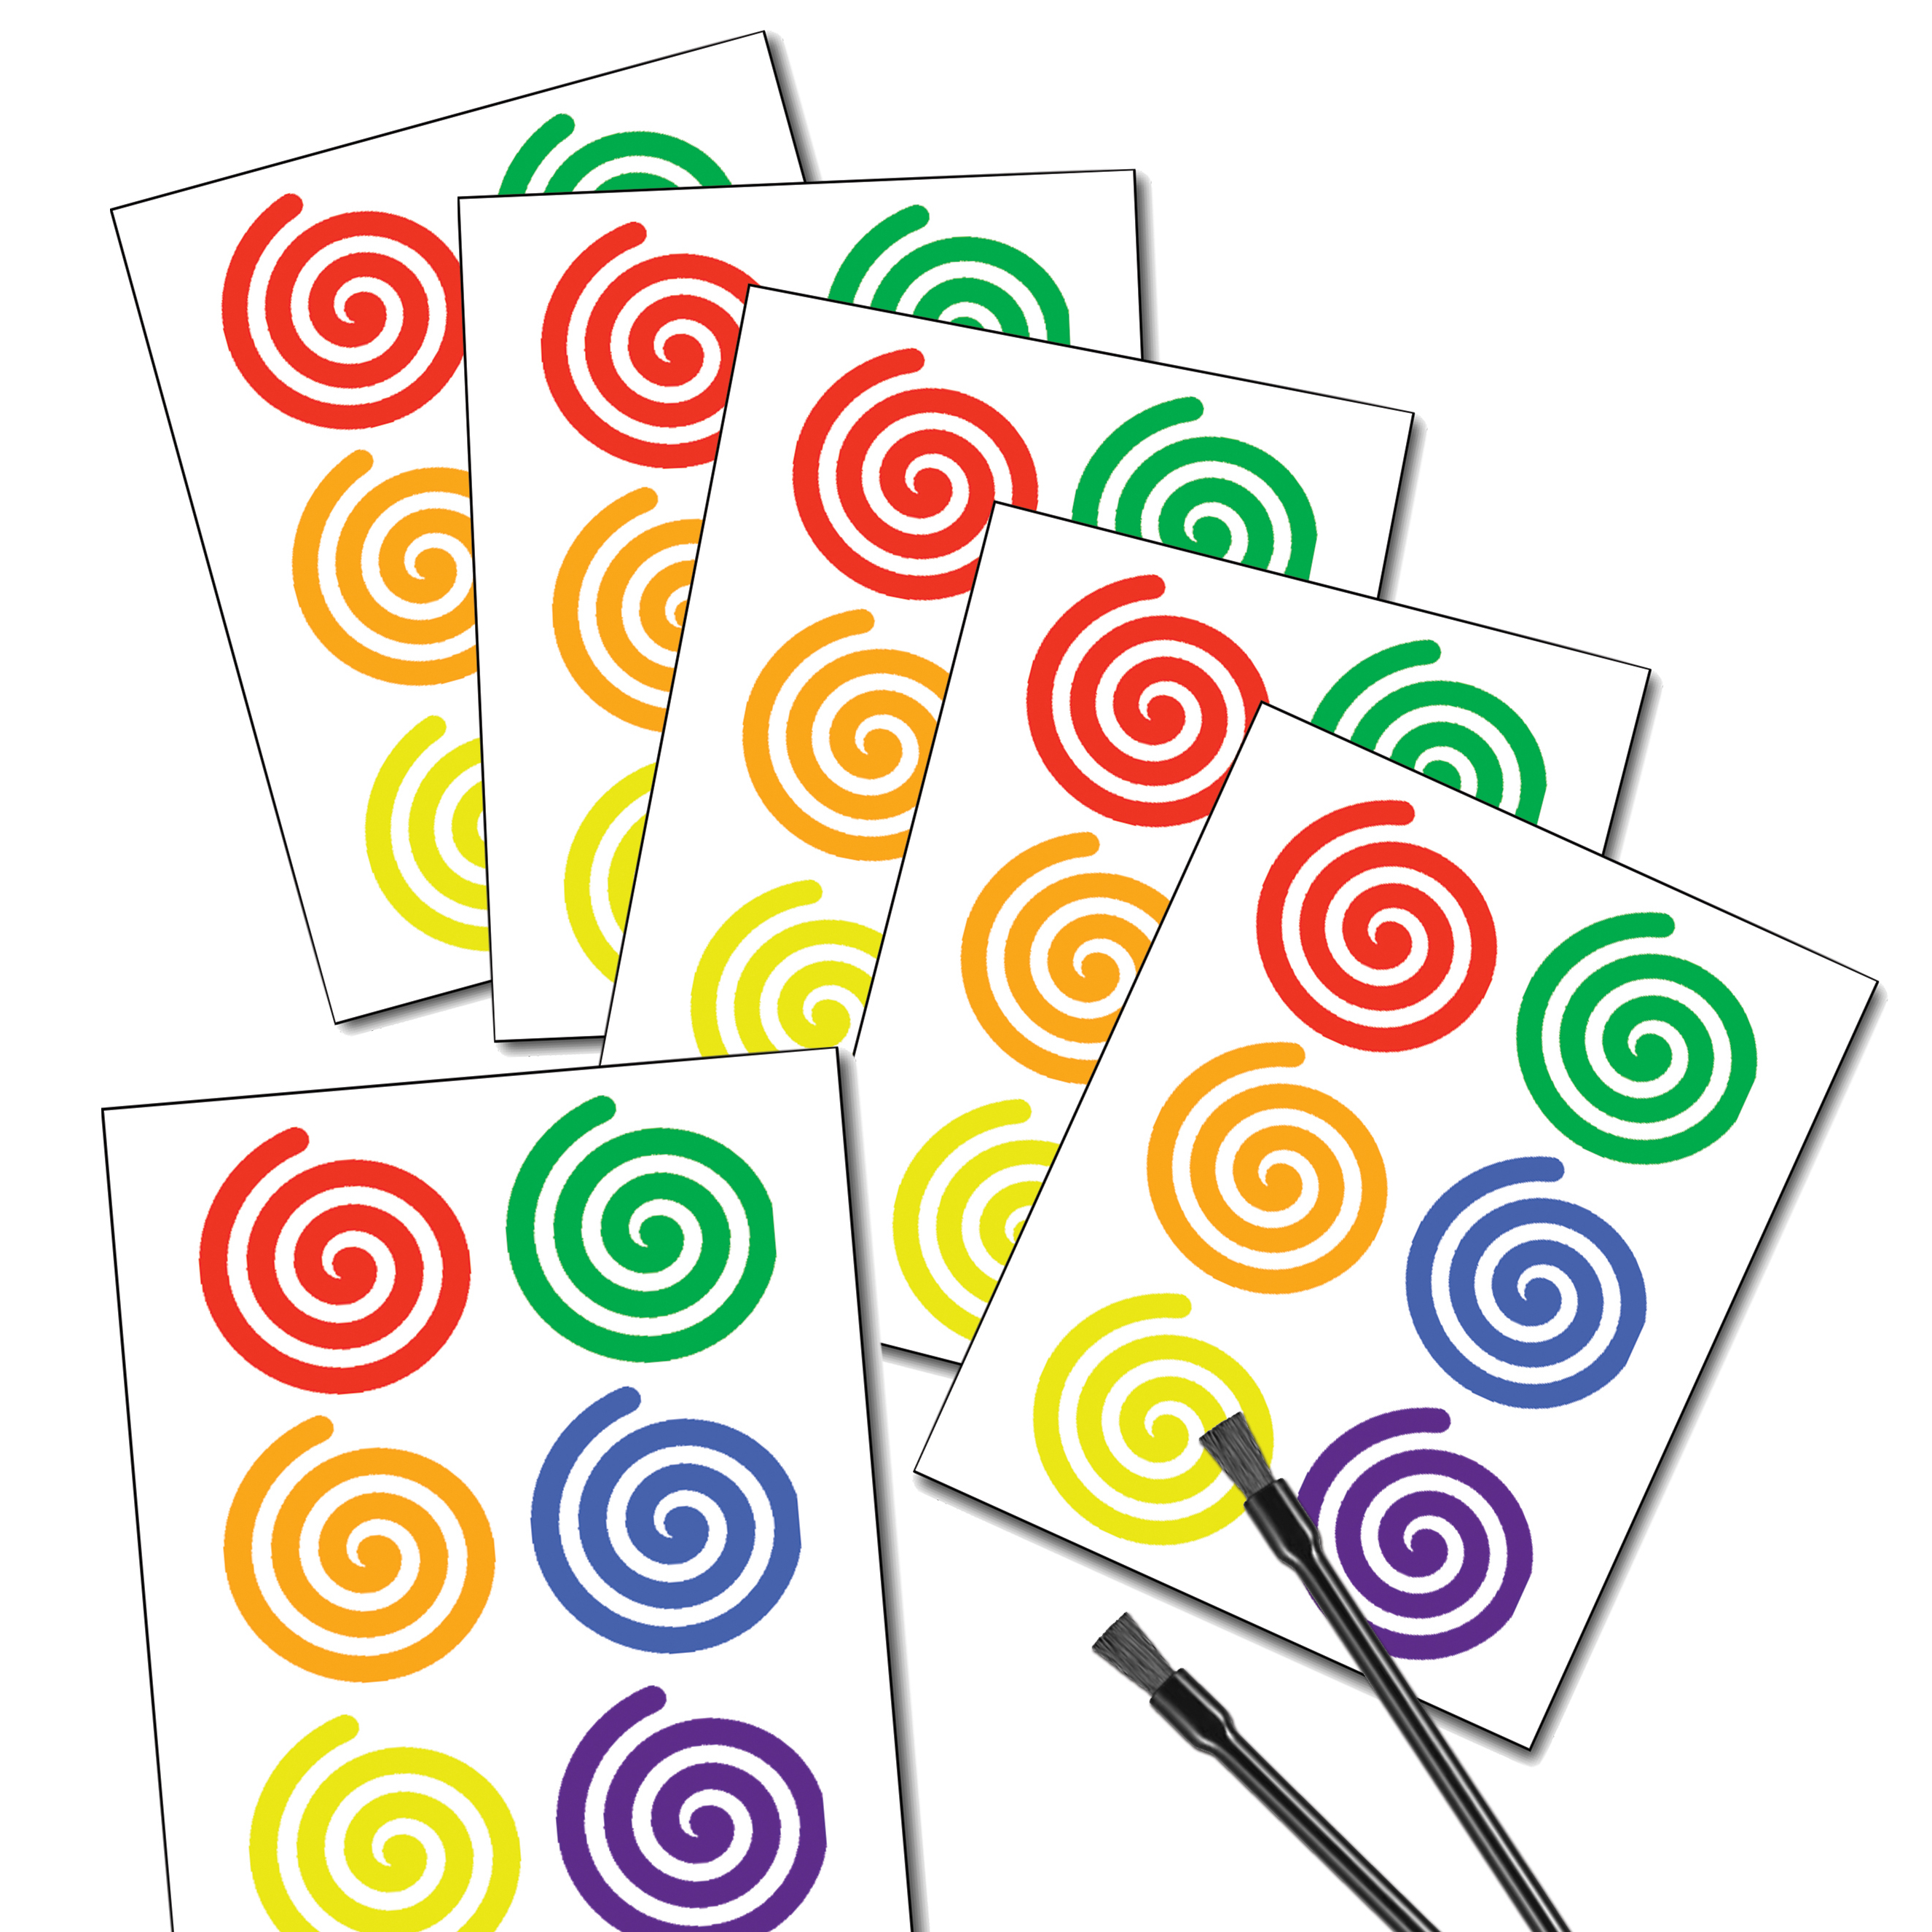 Paint Your Own PYO palette kit that includes edible food coloring paint palette and small paintbrushes to use to decorate your outline on the edilbe cupcake toppers